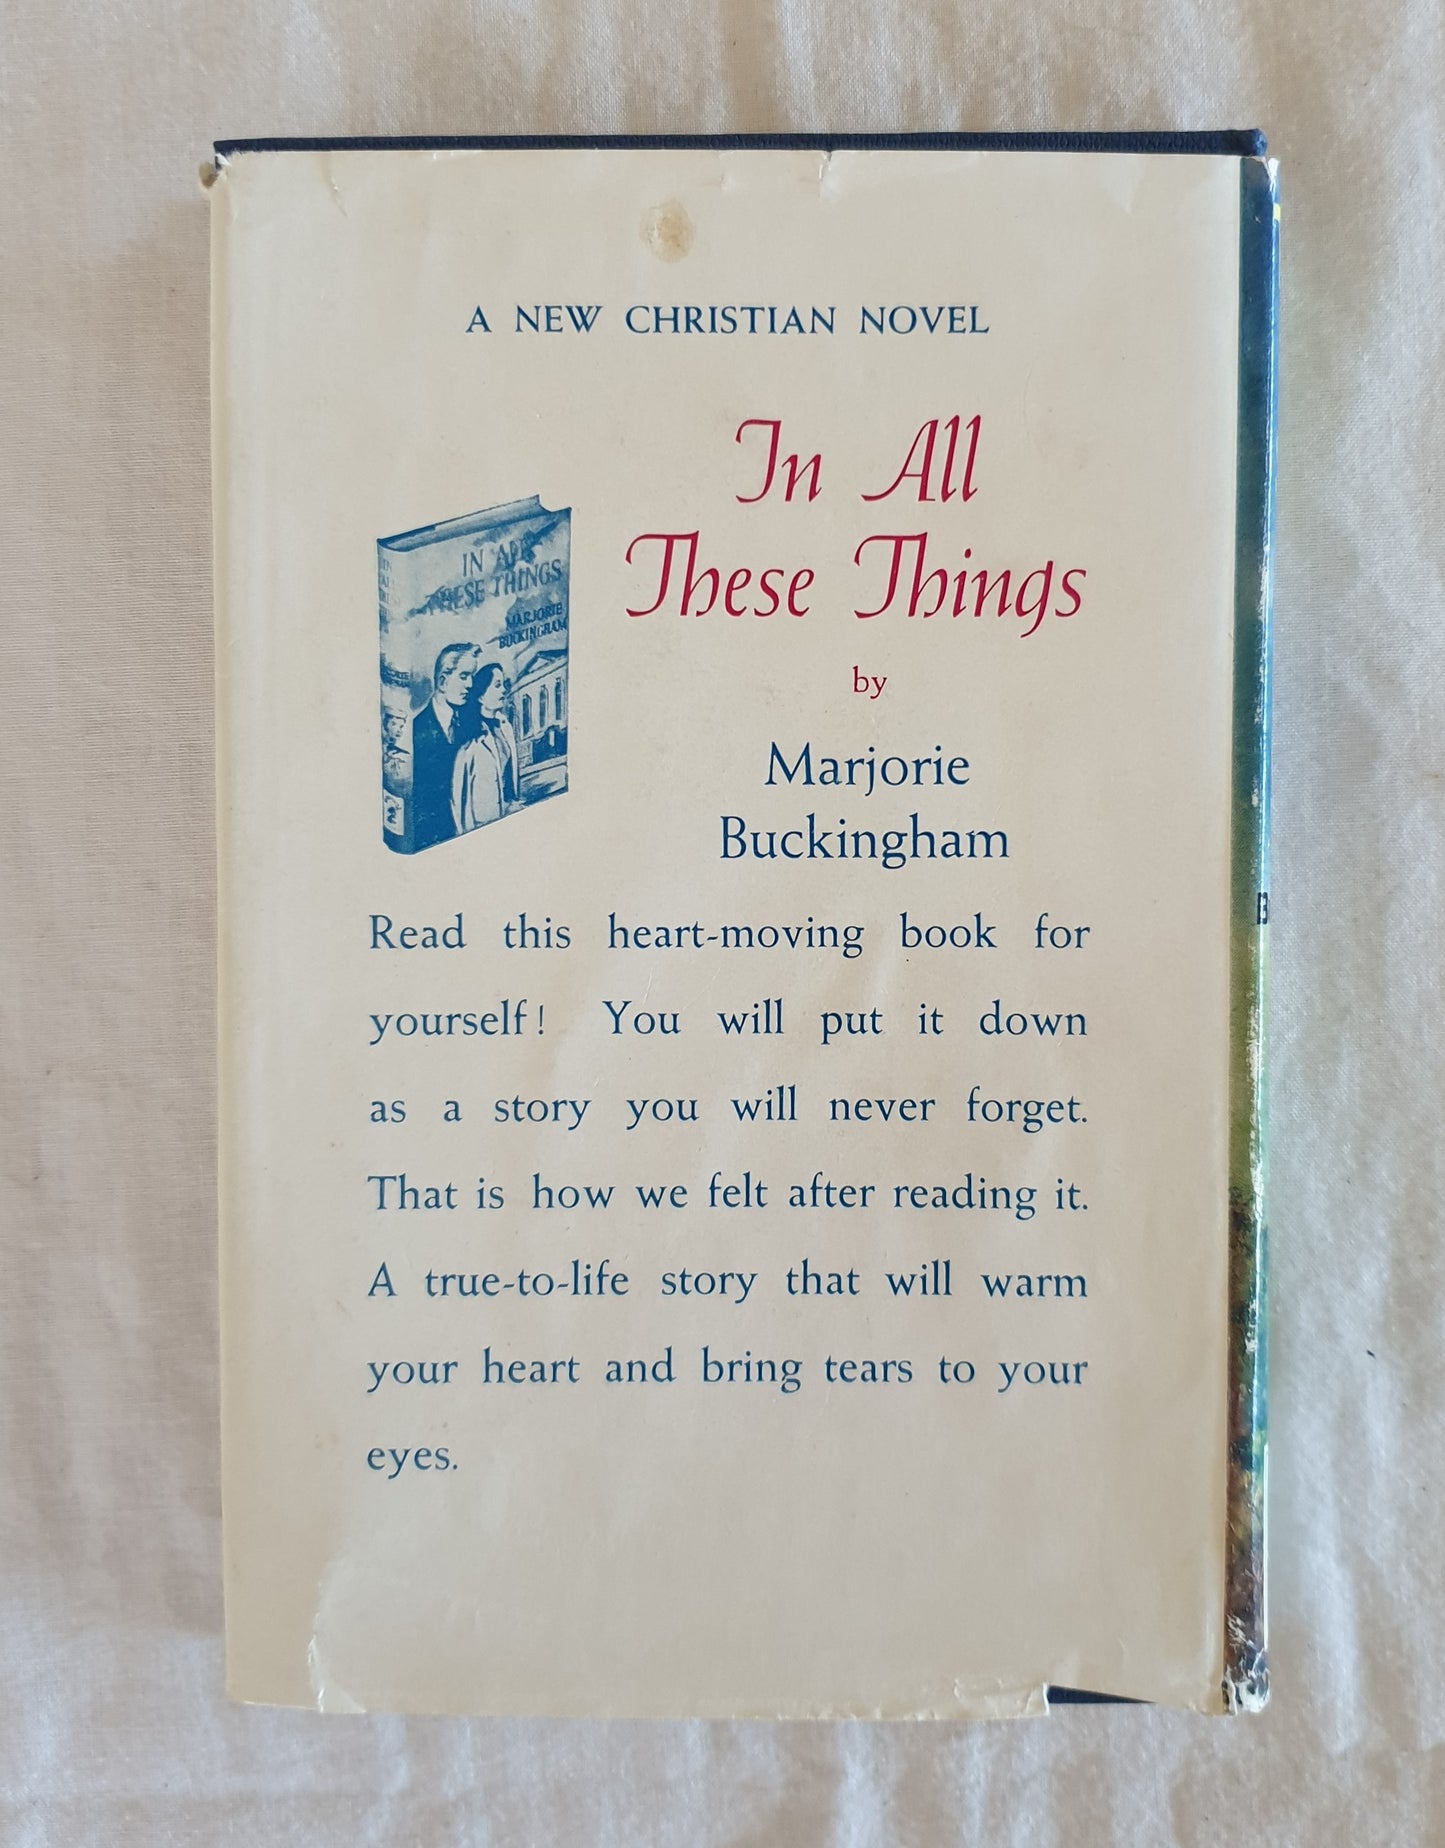 This My Son by Marjorie Buckingham